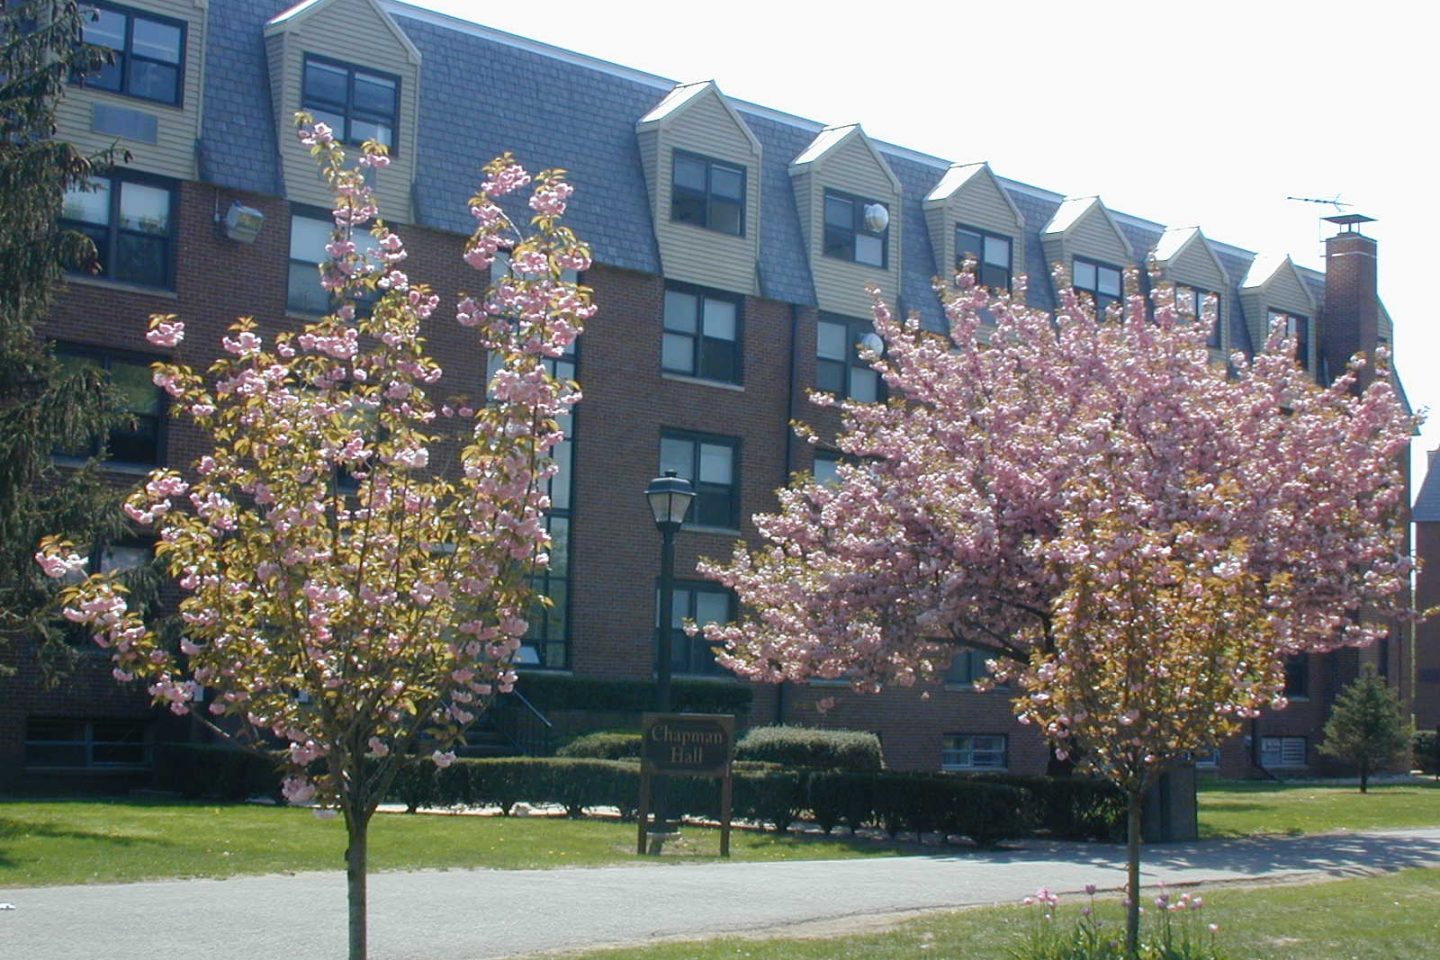 Chapman Hall in the spring with pink flowered trees